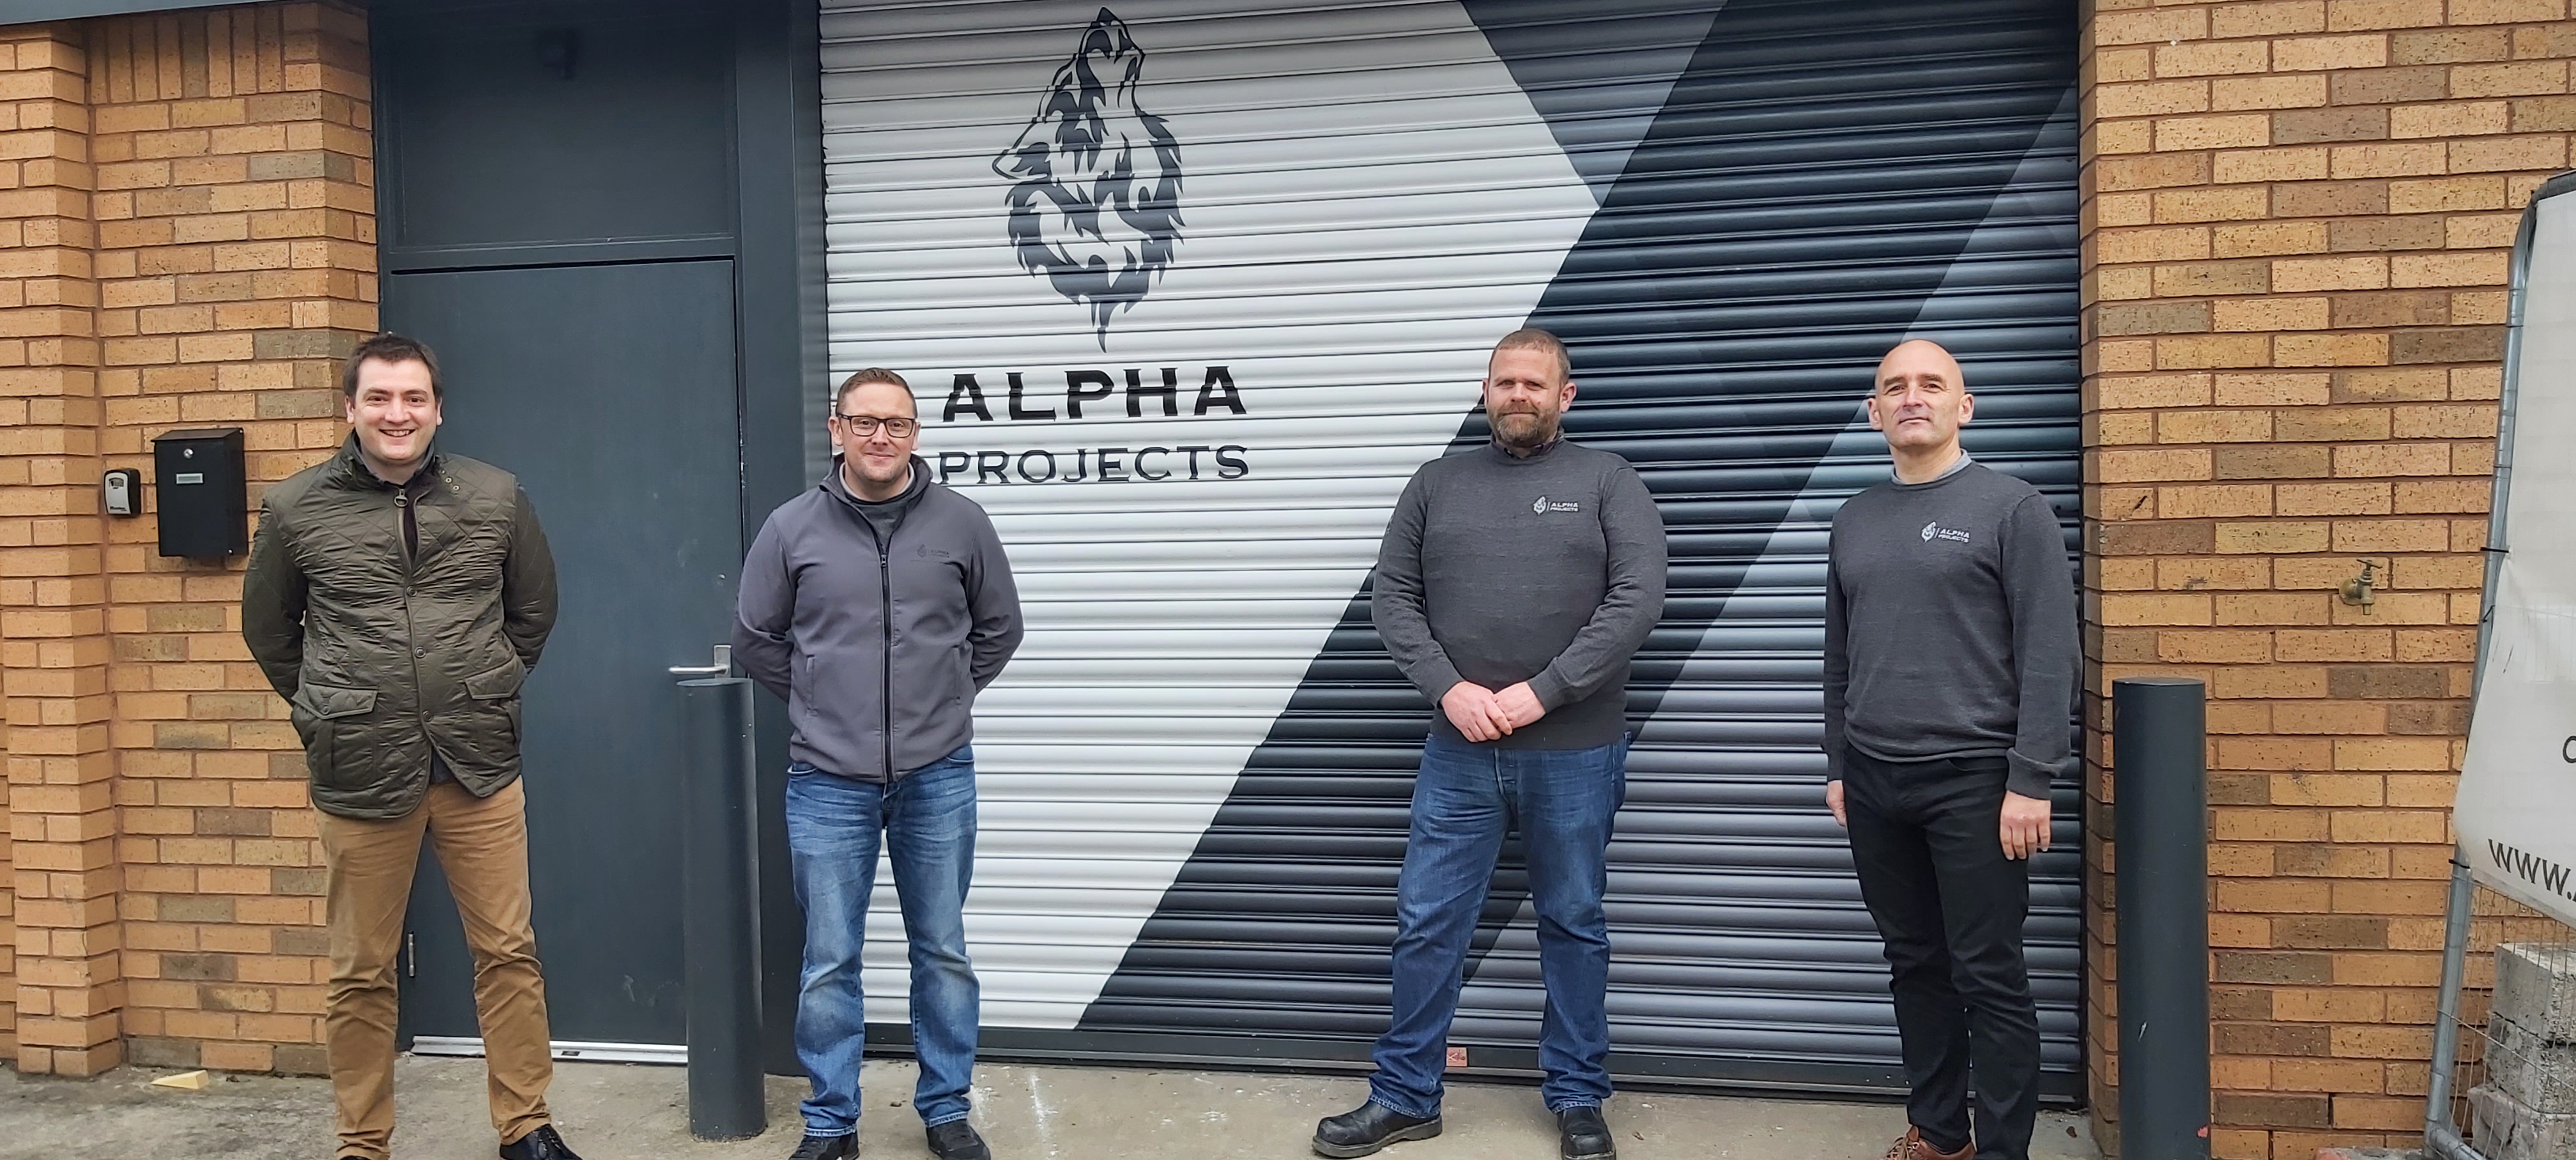 Alpha Projects grows presence in north-east with MCK Construction merger